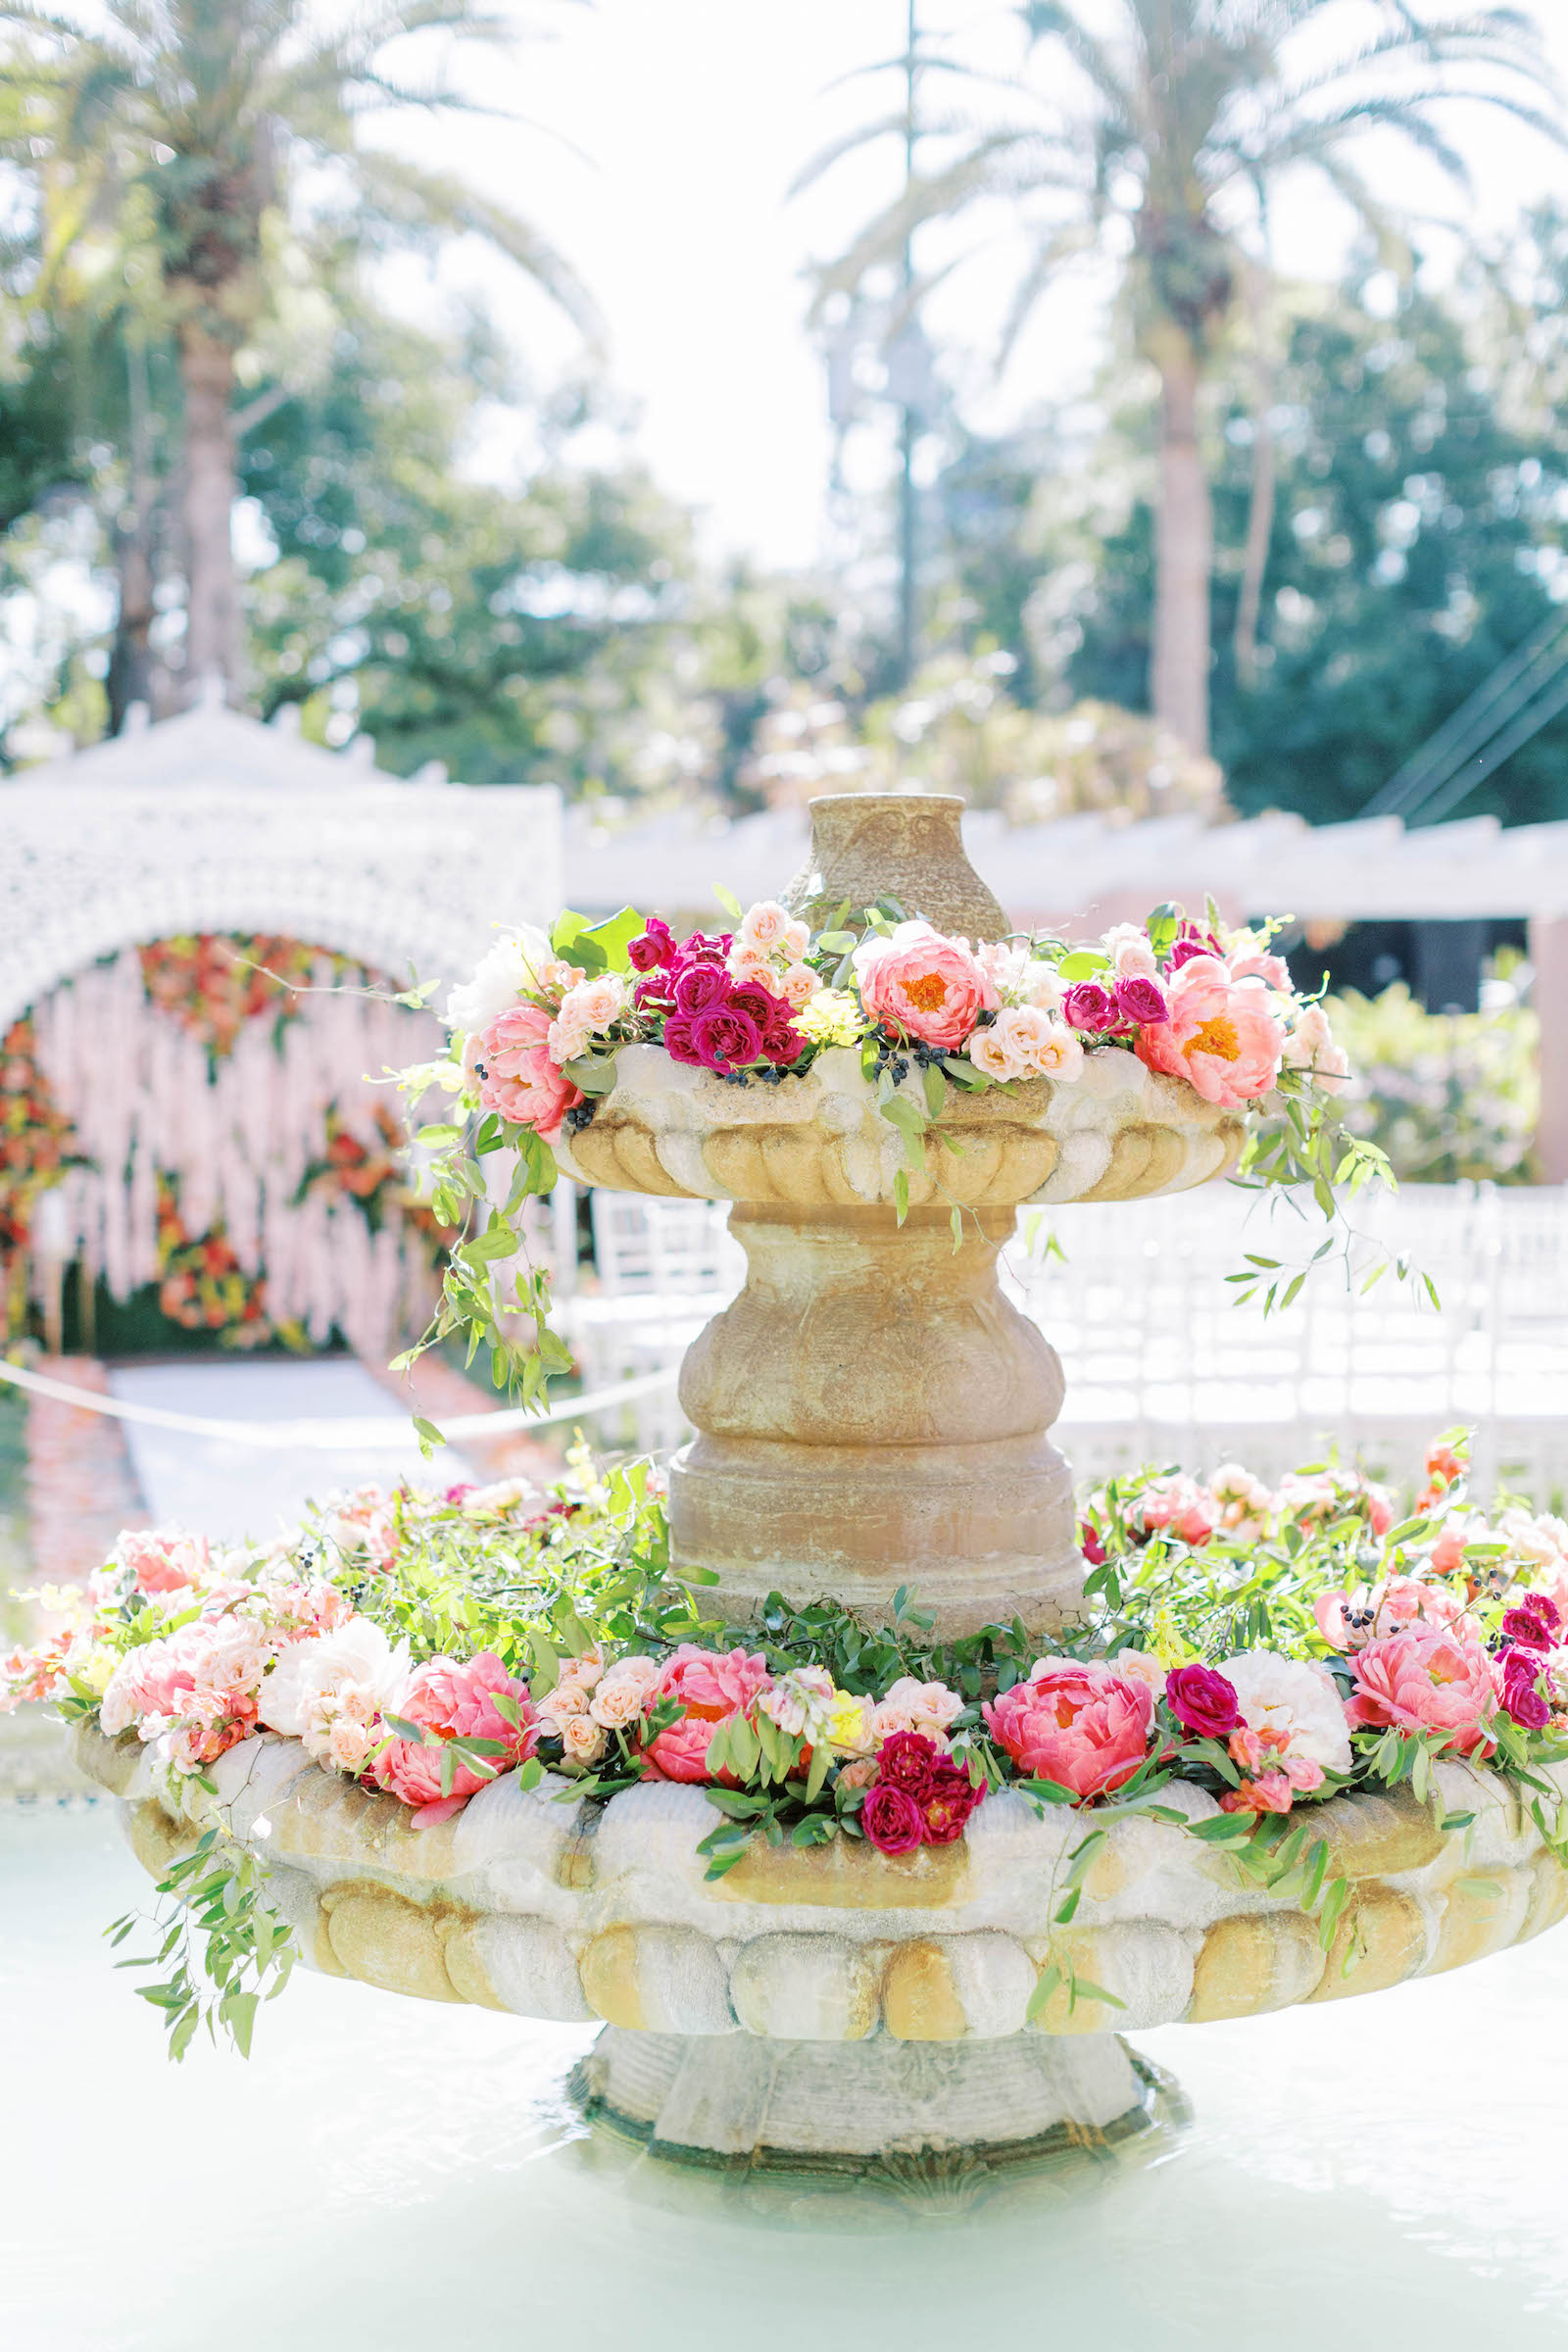 Fountain with Floral Décor in Pink and Orange with Greenery at the Vinoy Renaissance St. Petersburg | St. Petersburg Wedding Planner Parties a la CarteFountain with Floral Décor in Pink and Orange with Greenery at the Vinoy Renaissance St. Petersburg | St. Petersburg Wedding Planner Parties a la Carte